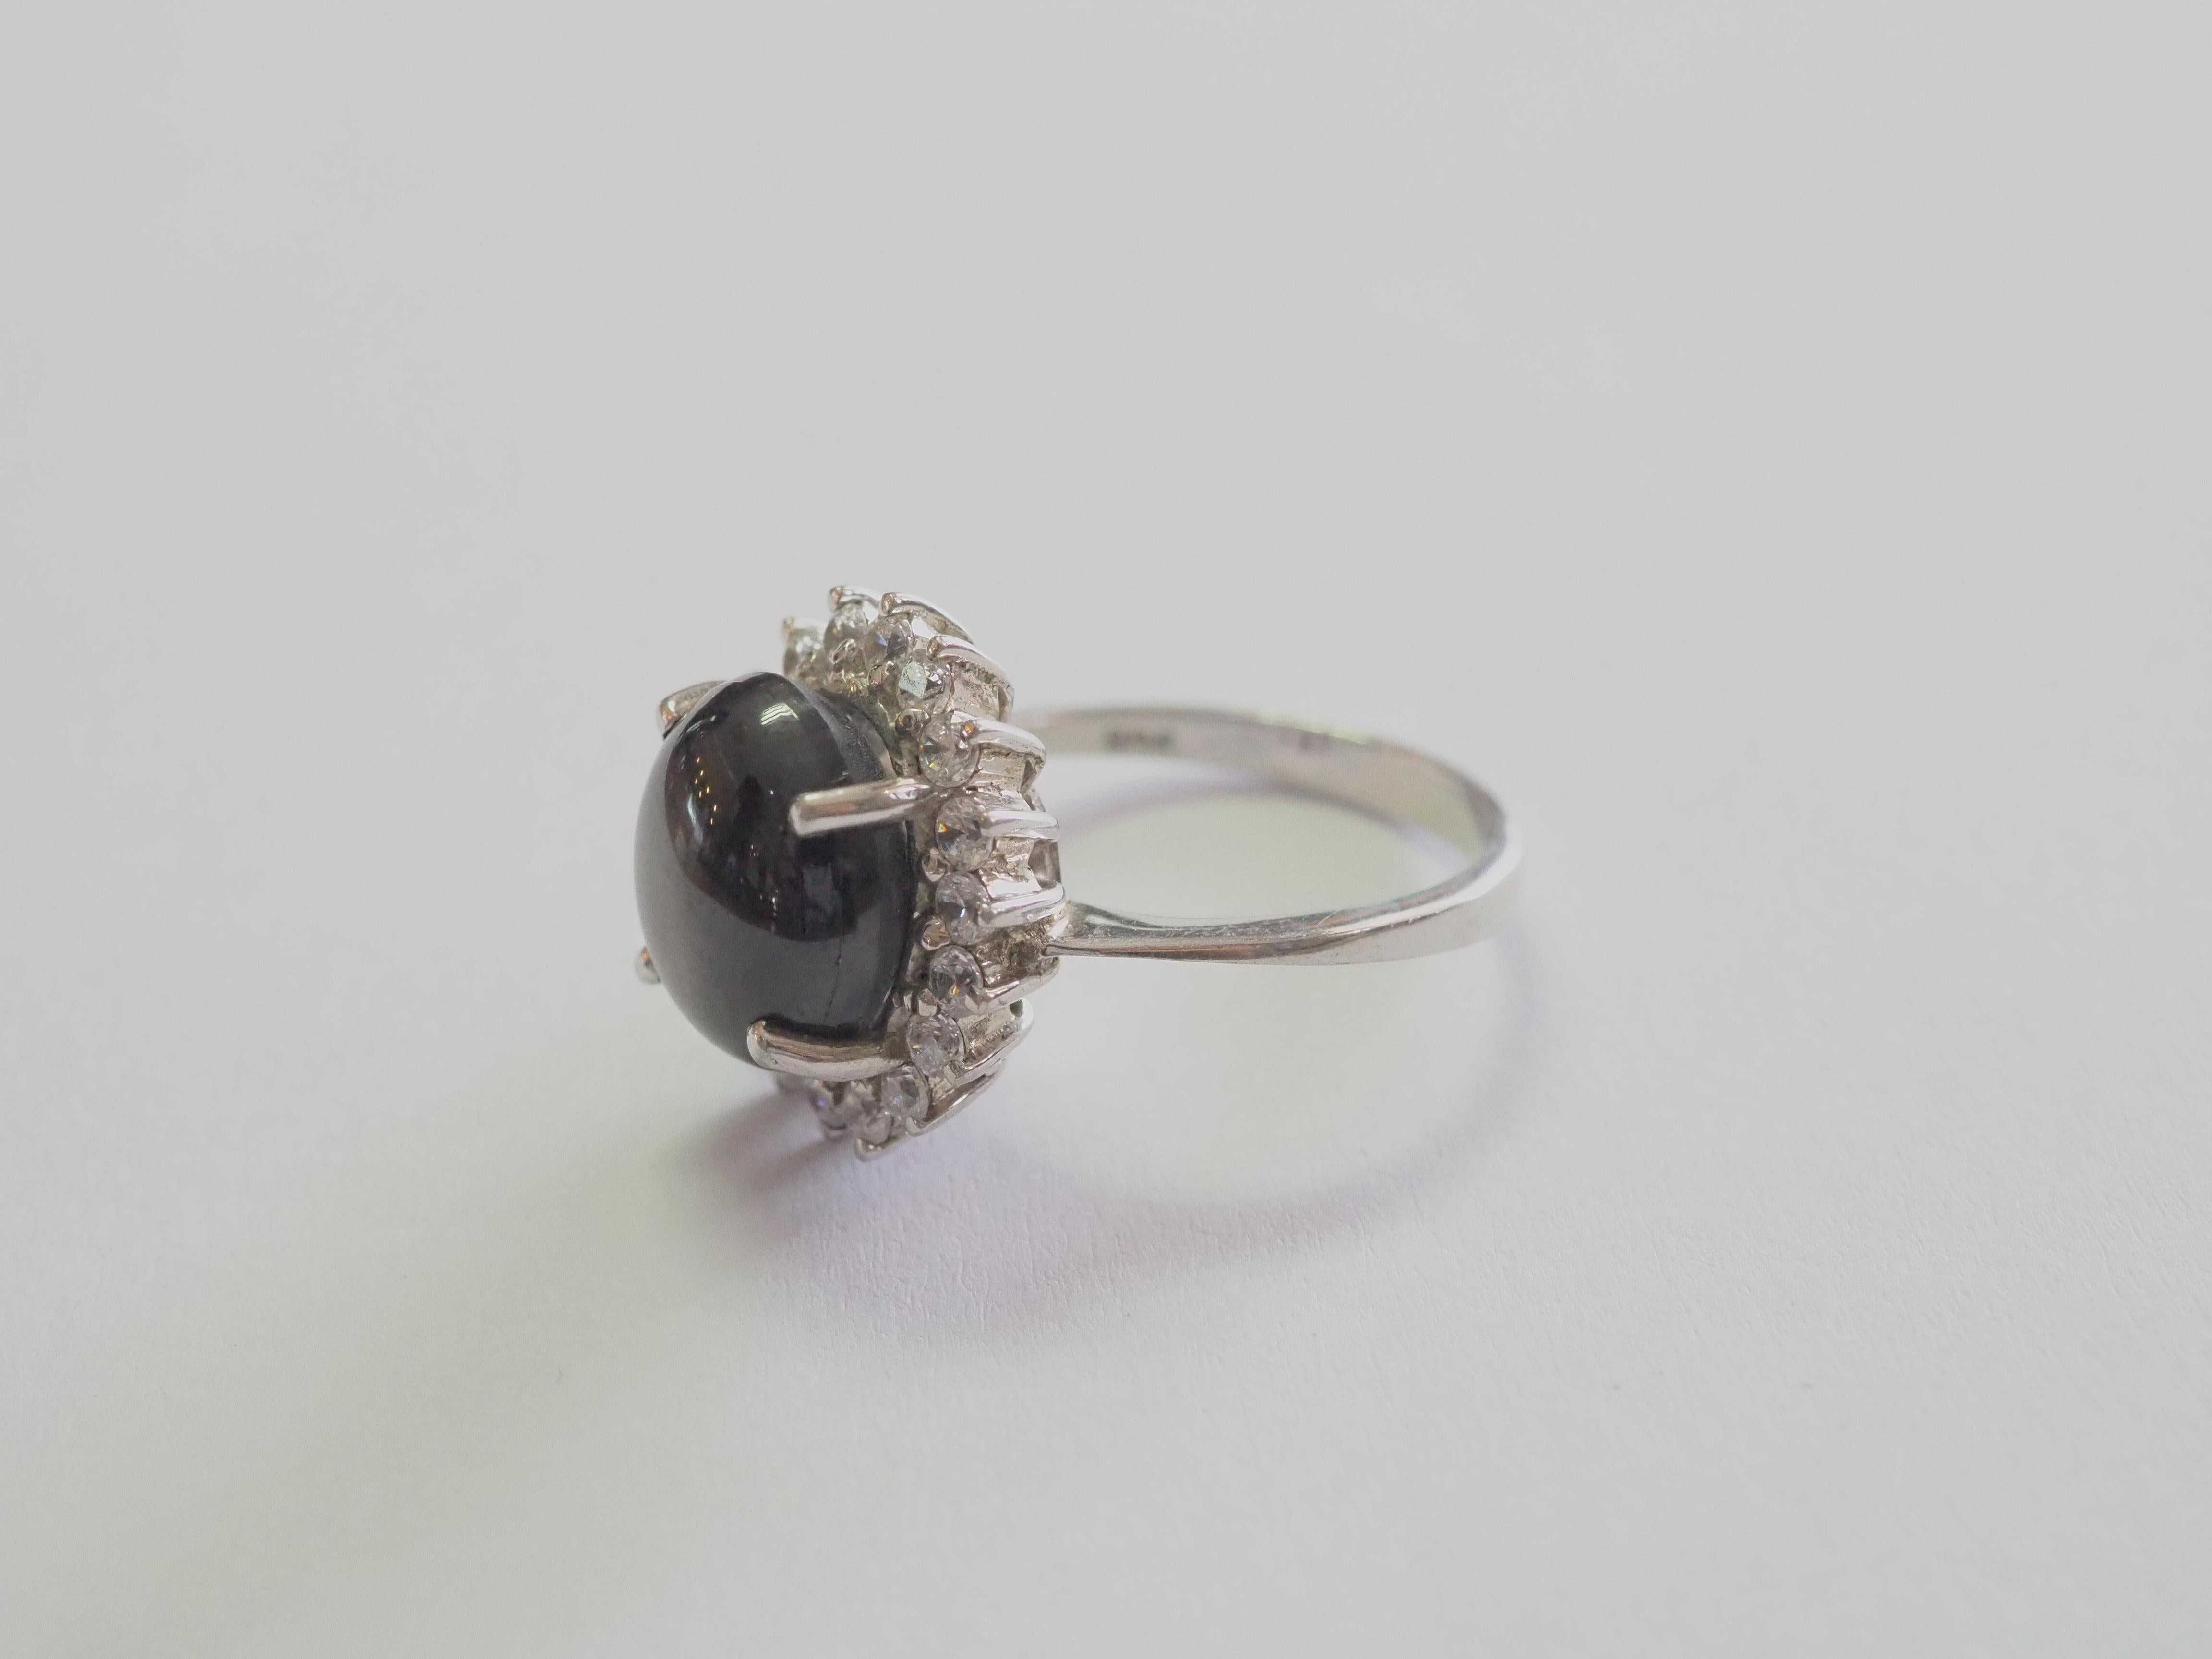 This ring is a beautiful cocktail ring in solid sterling silver. The ring is decorated by natural cabochon black star sapphire prong set in the middle. The brilliant white stones are cubic zirconia. The lindy star will show when shone light directly